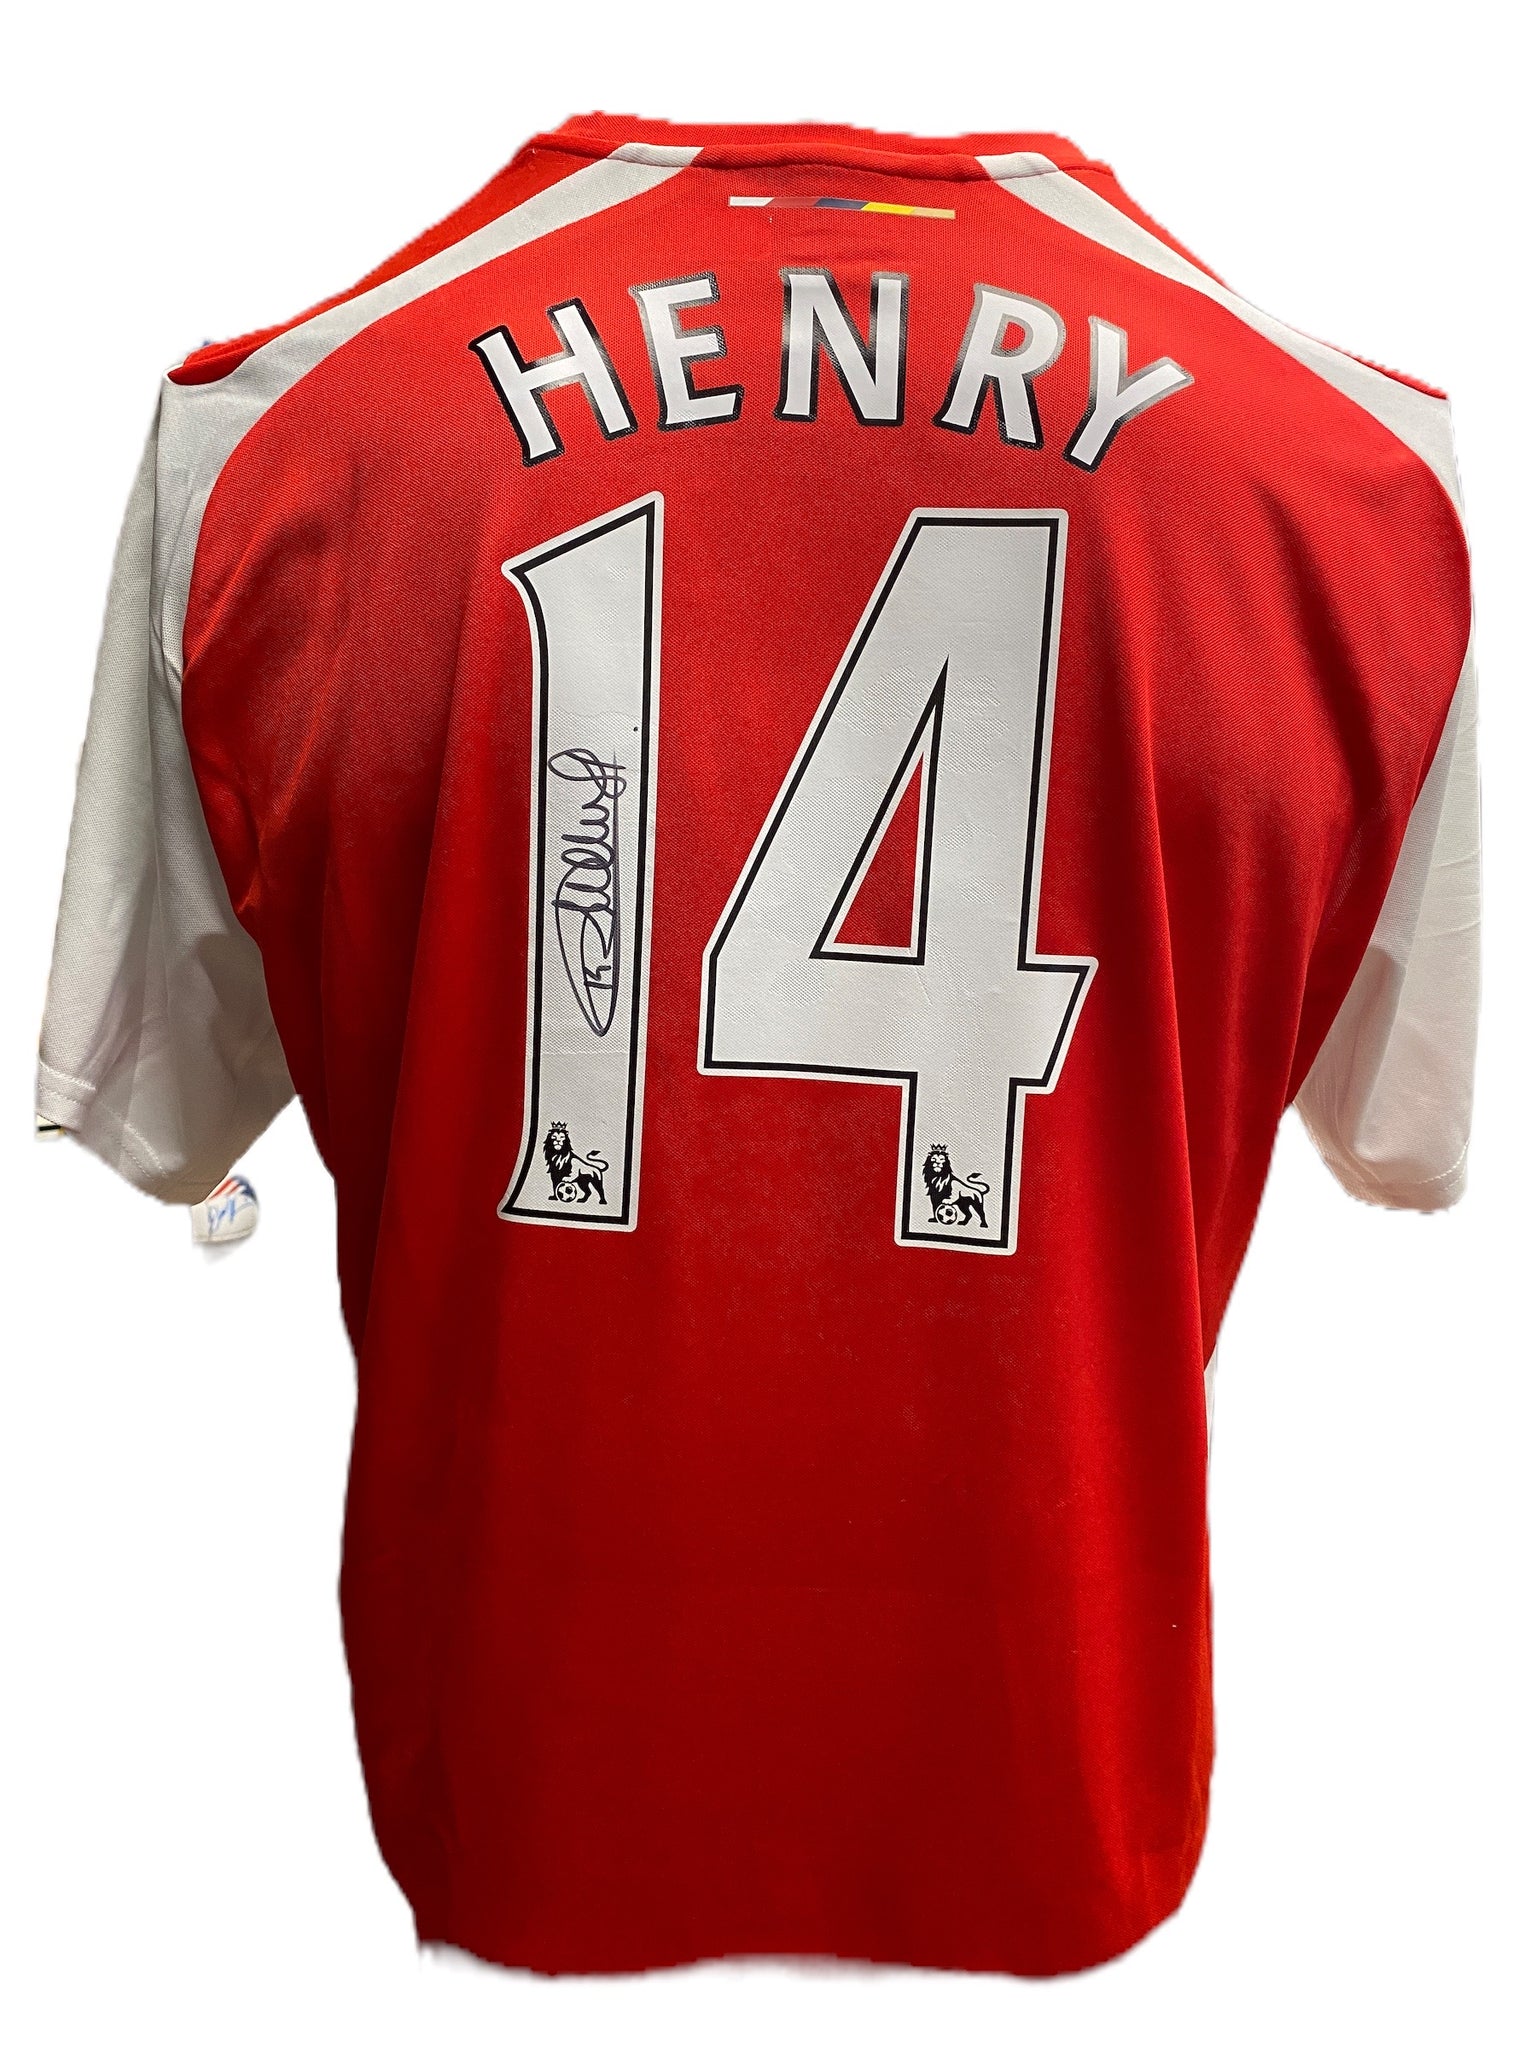 Jersey / Arsenal / Thierry Henry – On Field Mx